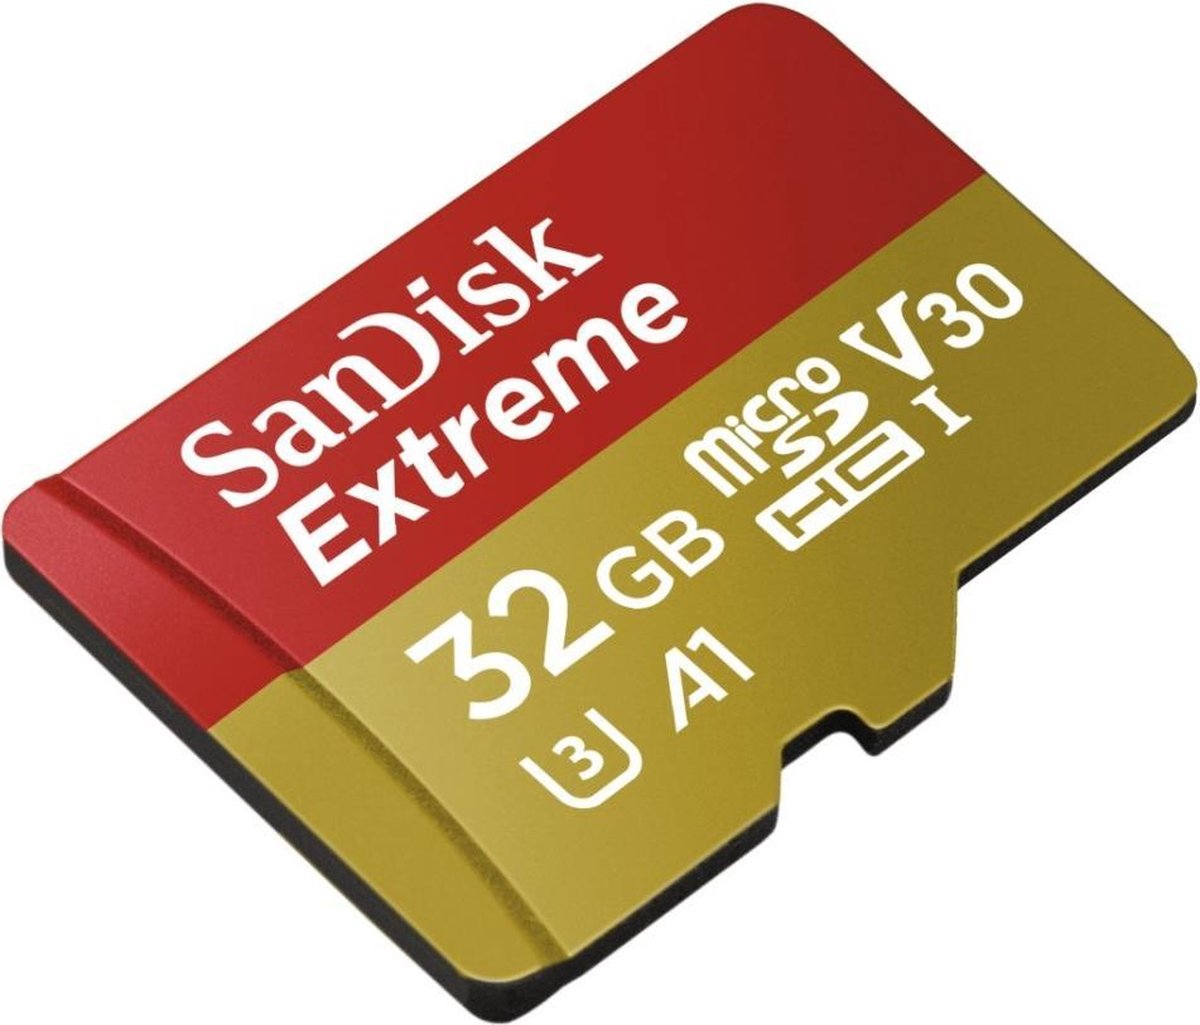 Extreme micro SD kaart GB - dronedepot